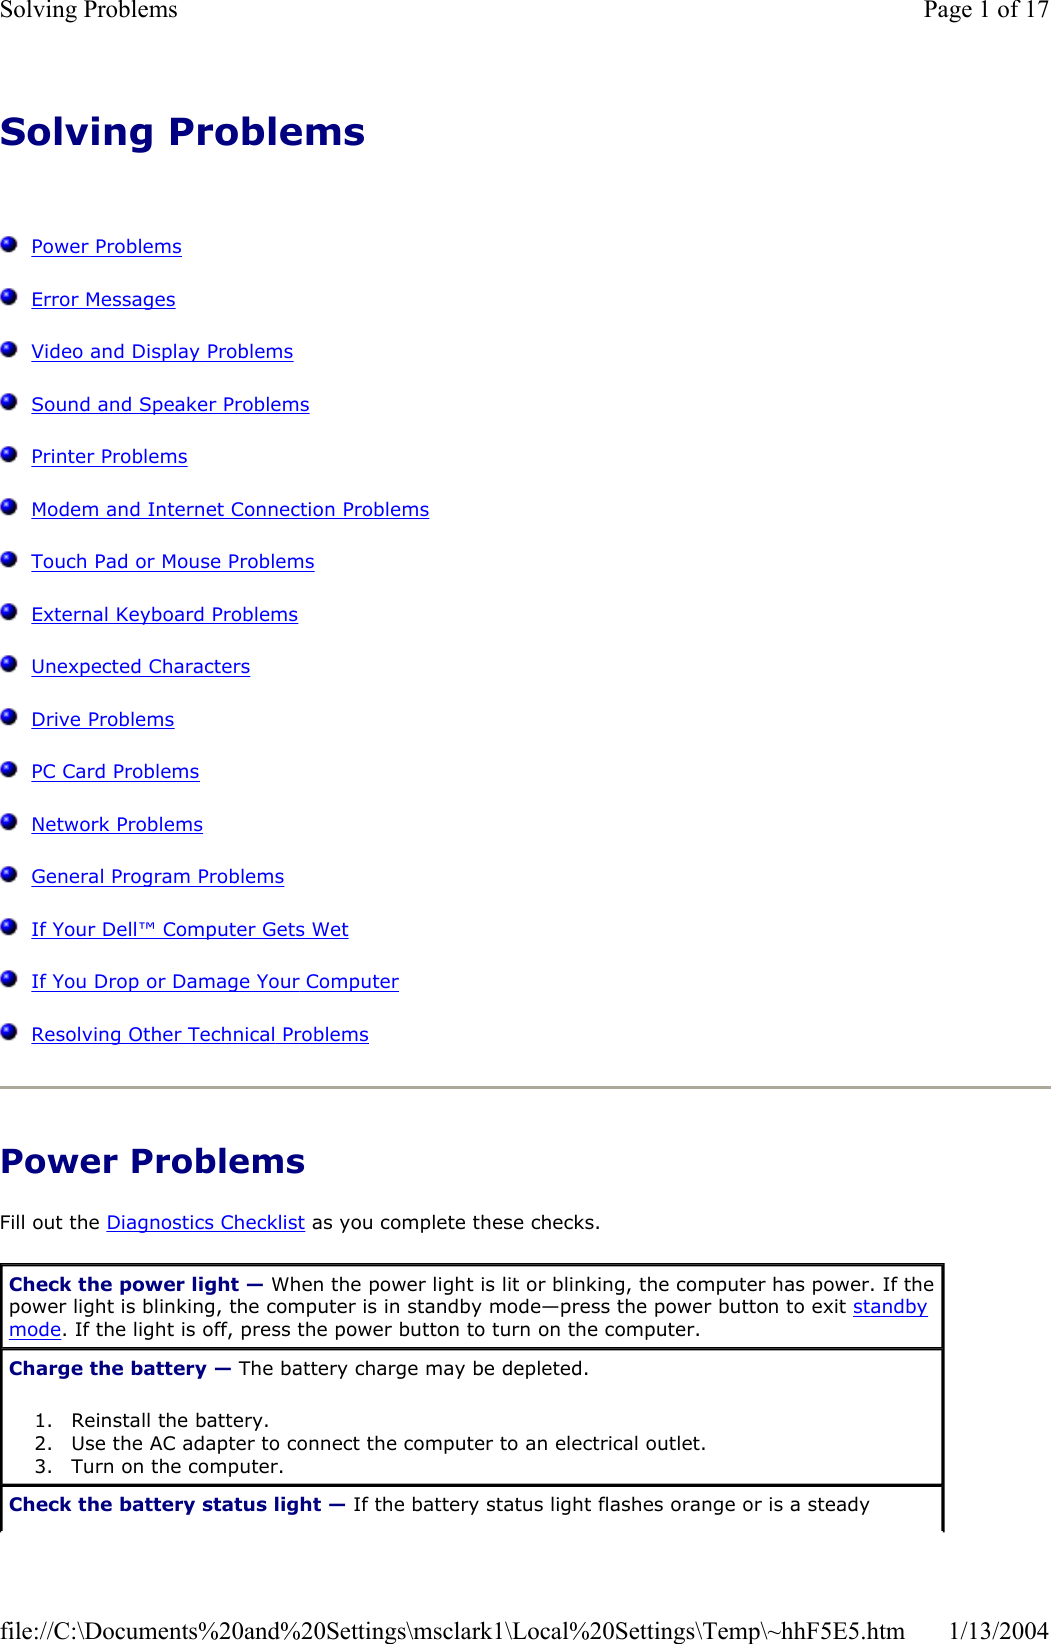 Solving ProblemsPower ProblemsError MessagesVideo and Display ProblemsSound and Speaker ProblemsPrinter ProblemsModem and Internet Connection ProblemsTouch Pad or Mouse ProblemsExternal Keyboard ProblemsUnexpected CharactersDrive ProblemsPC Card ProblemsNetwork ProblemsGeneral Program ProblemsIf Your Dell™Computer Gets WetIf You Drop or Damage Your ComputerResolving Other Technical ProblemsPower Problems Fill out the Diagnostics Checklist as you complete these checks. Check the power light — When the power light is lit or blinking, the computer has power. If the power light is blinking, the computer is in standby mode—press the power button to exit standbymode. If the light is off, press the power button to turn on the computer. Charge the battery — The battery charge may be depleted. 1. Reinstall the battery.  2. Use the AC adapter to connect the computer to an electrical outlet.  3. Turn on the computer.  Check the battery status light — If the battery status light flashes orange or is a steady Page 1 of 17Solving Problems1/13/2004file://C:\Documents%20and%20Settings\msclark1\Local%20Settings\Temp\~hhF5E5.htm